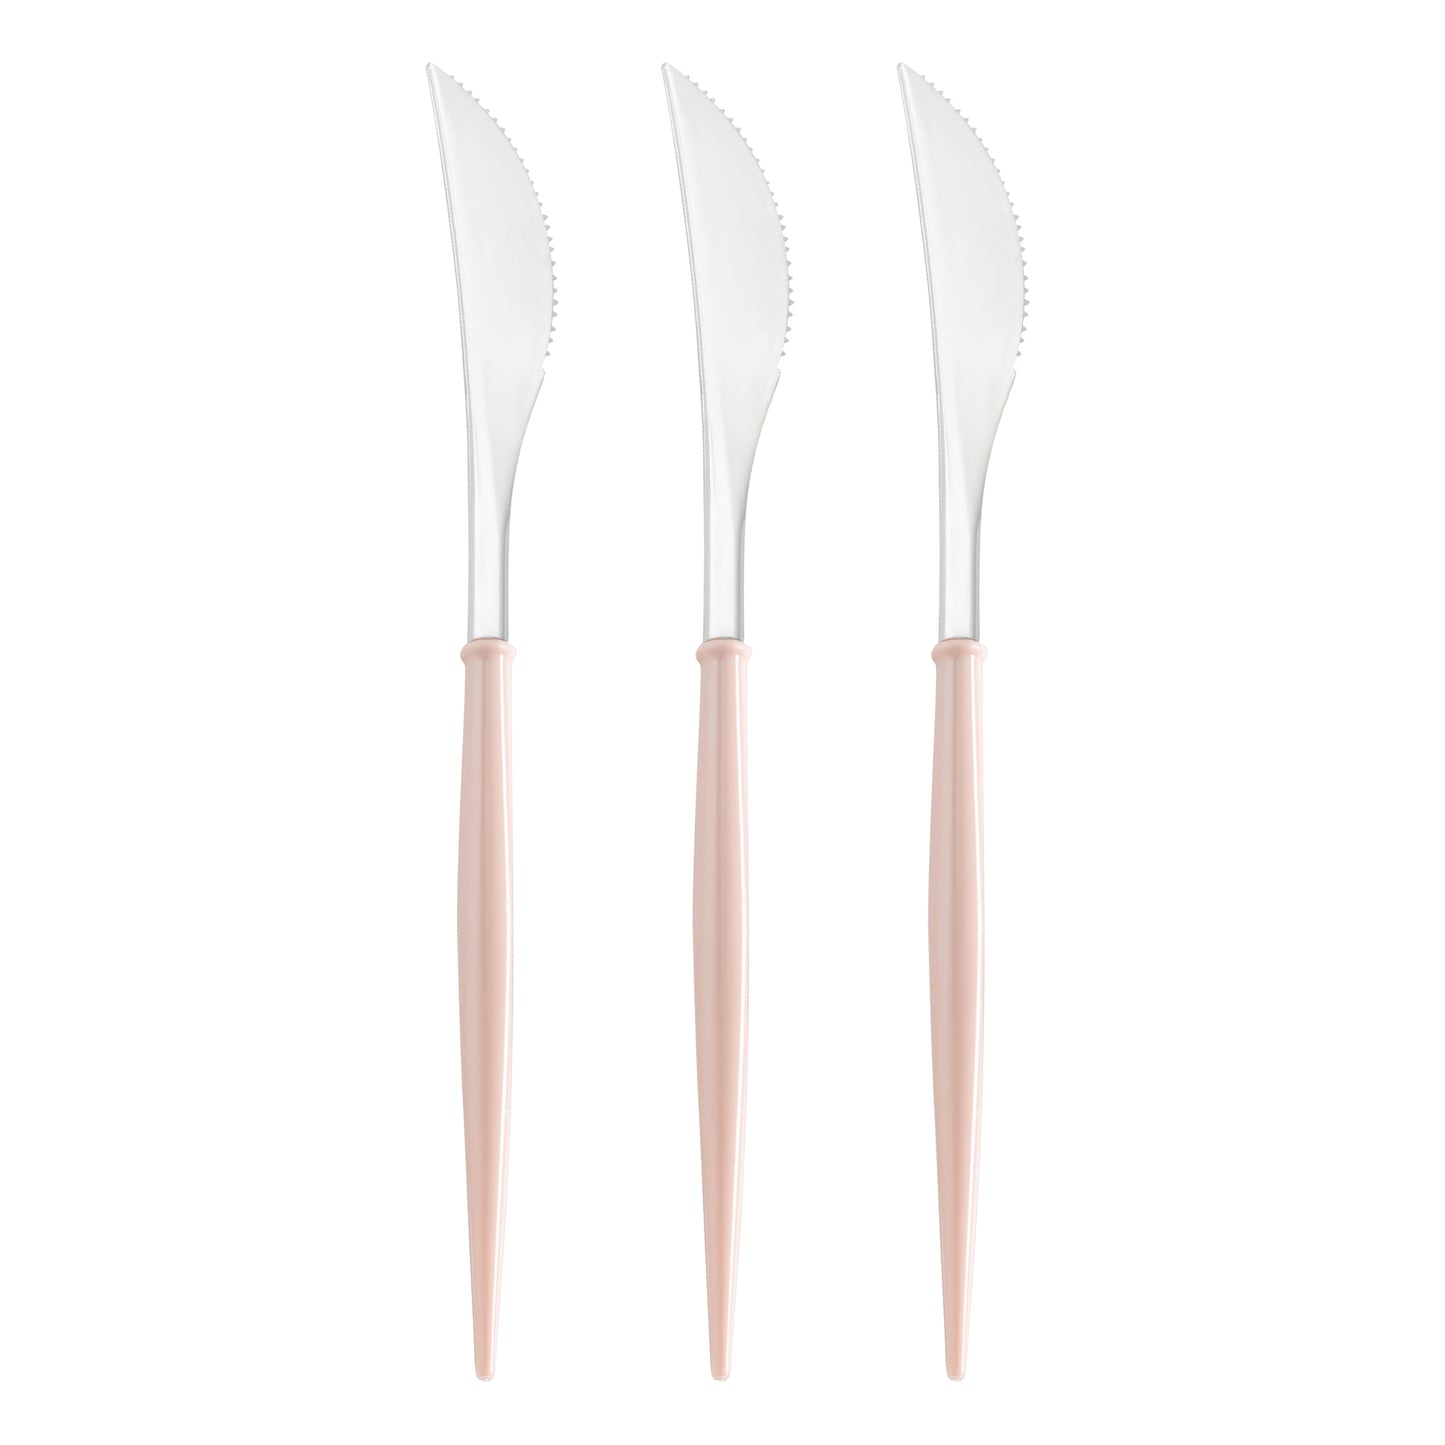 Silver with Pink Handle Moderno Plastic Dinner Knives